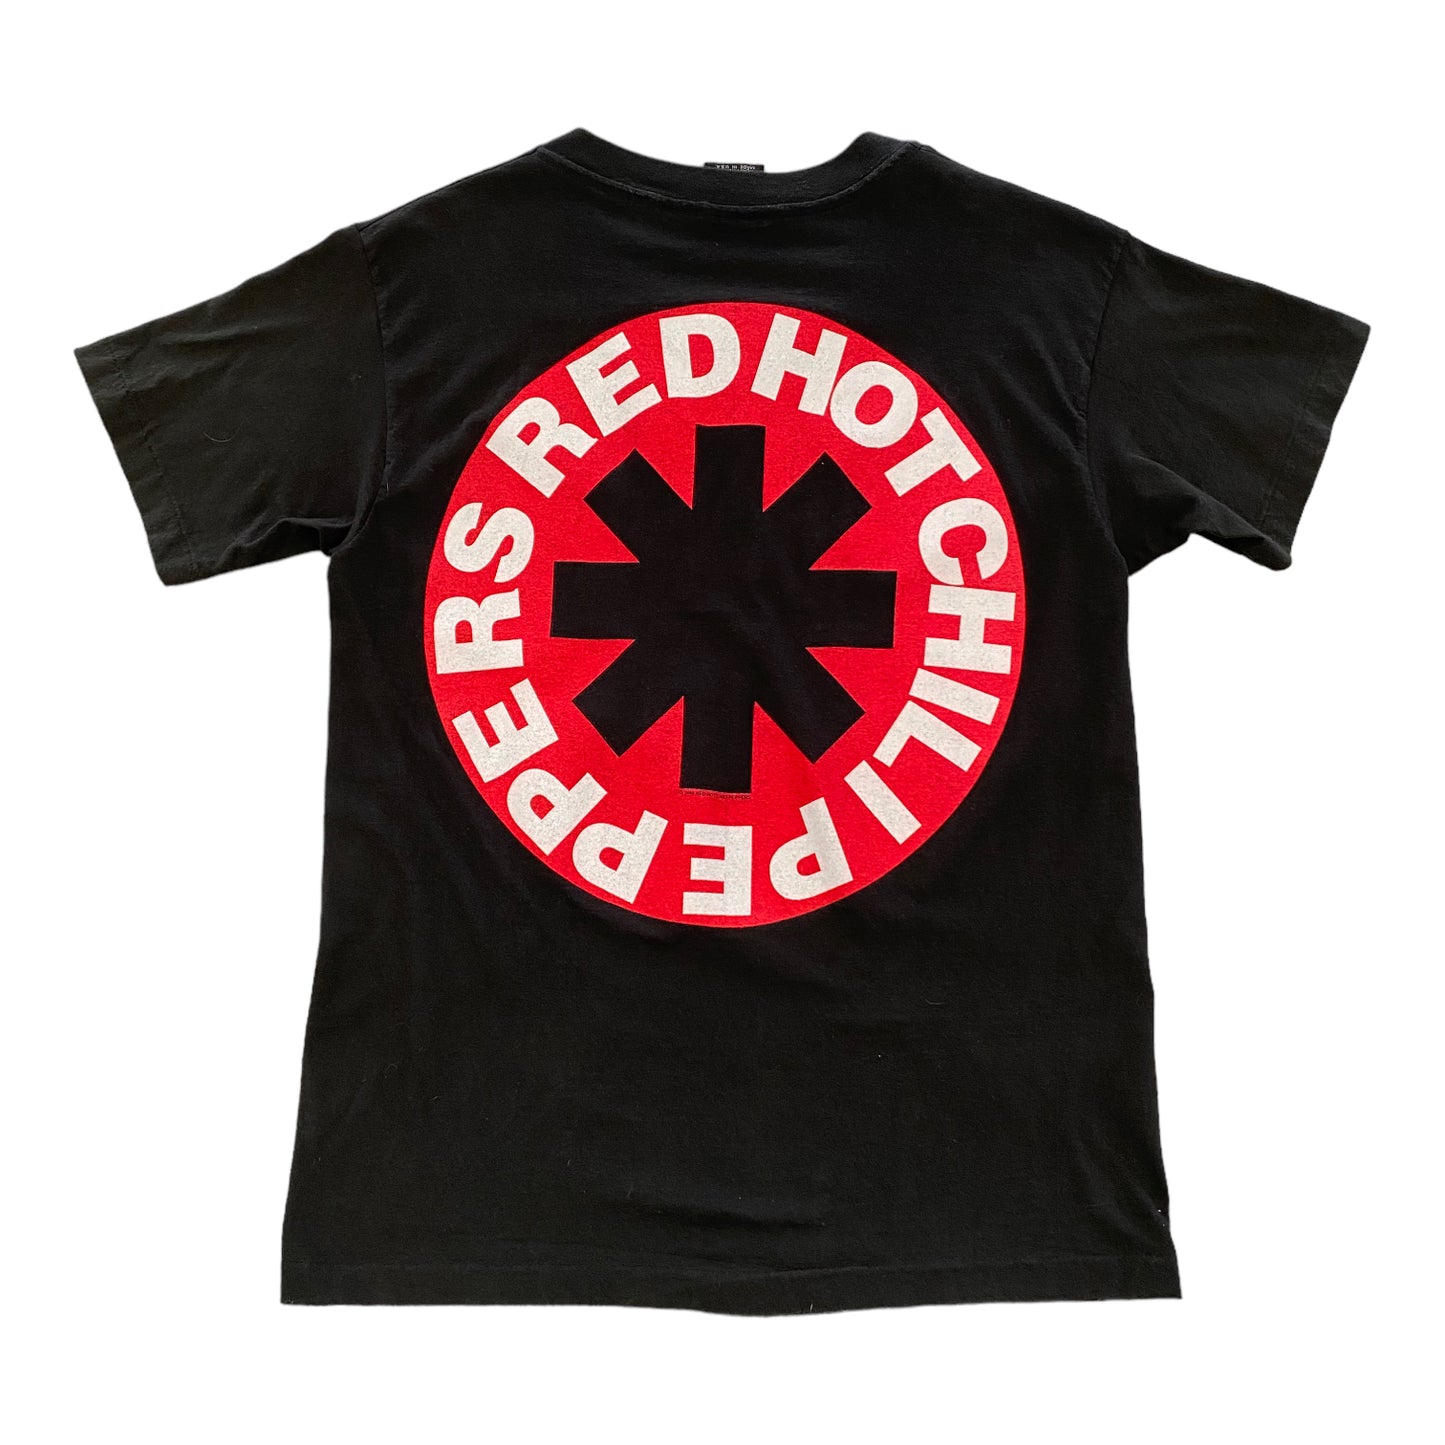 1990 Red Hot Chili Peppers Vintage Band T-shirt